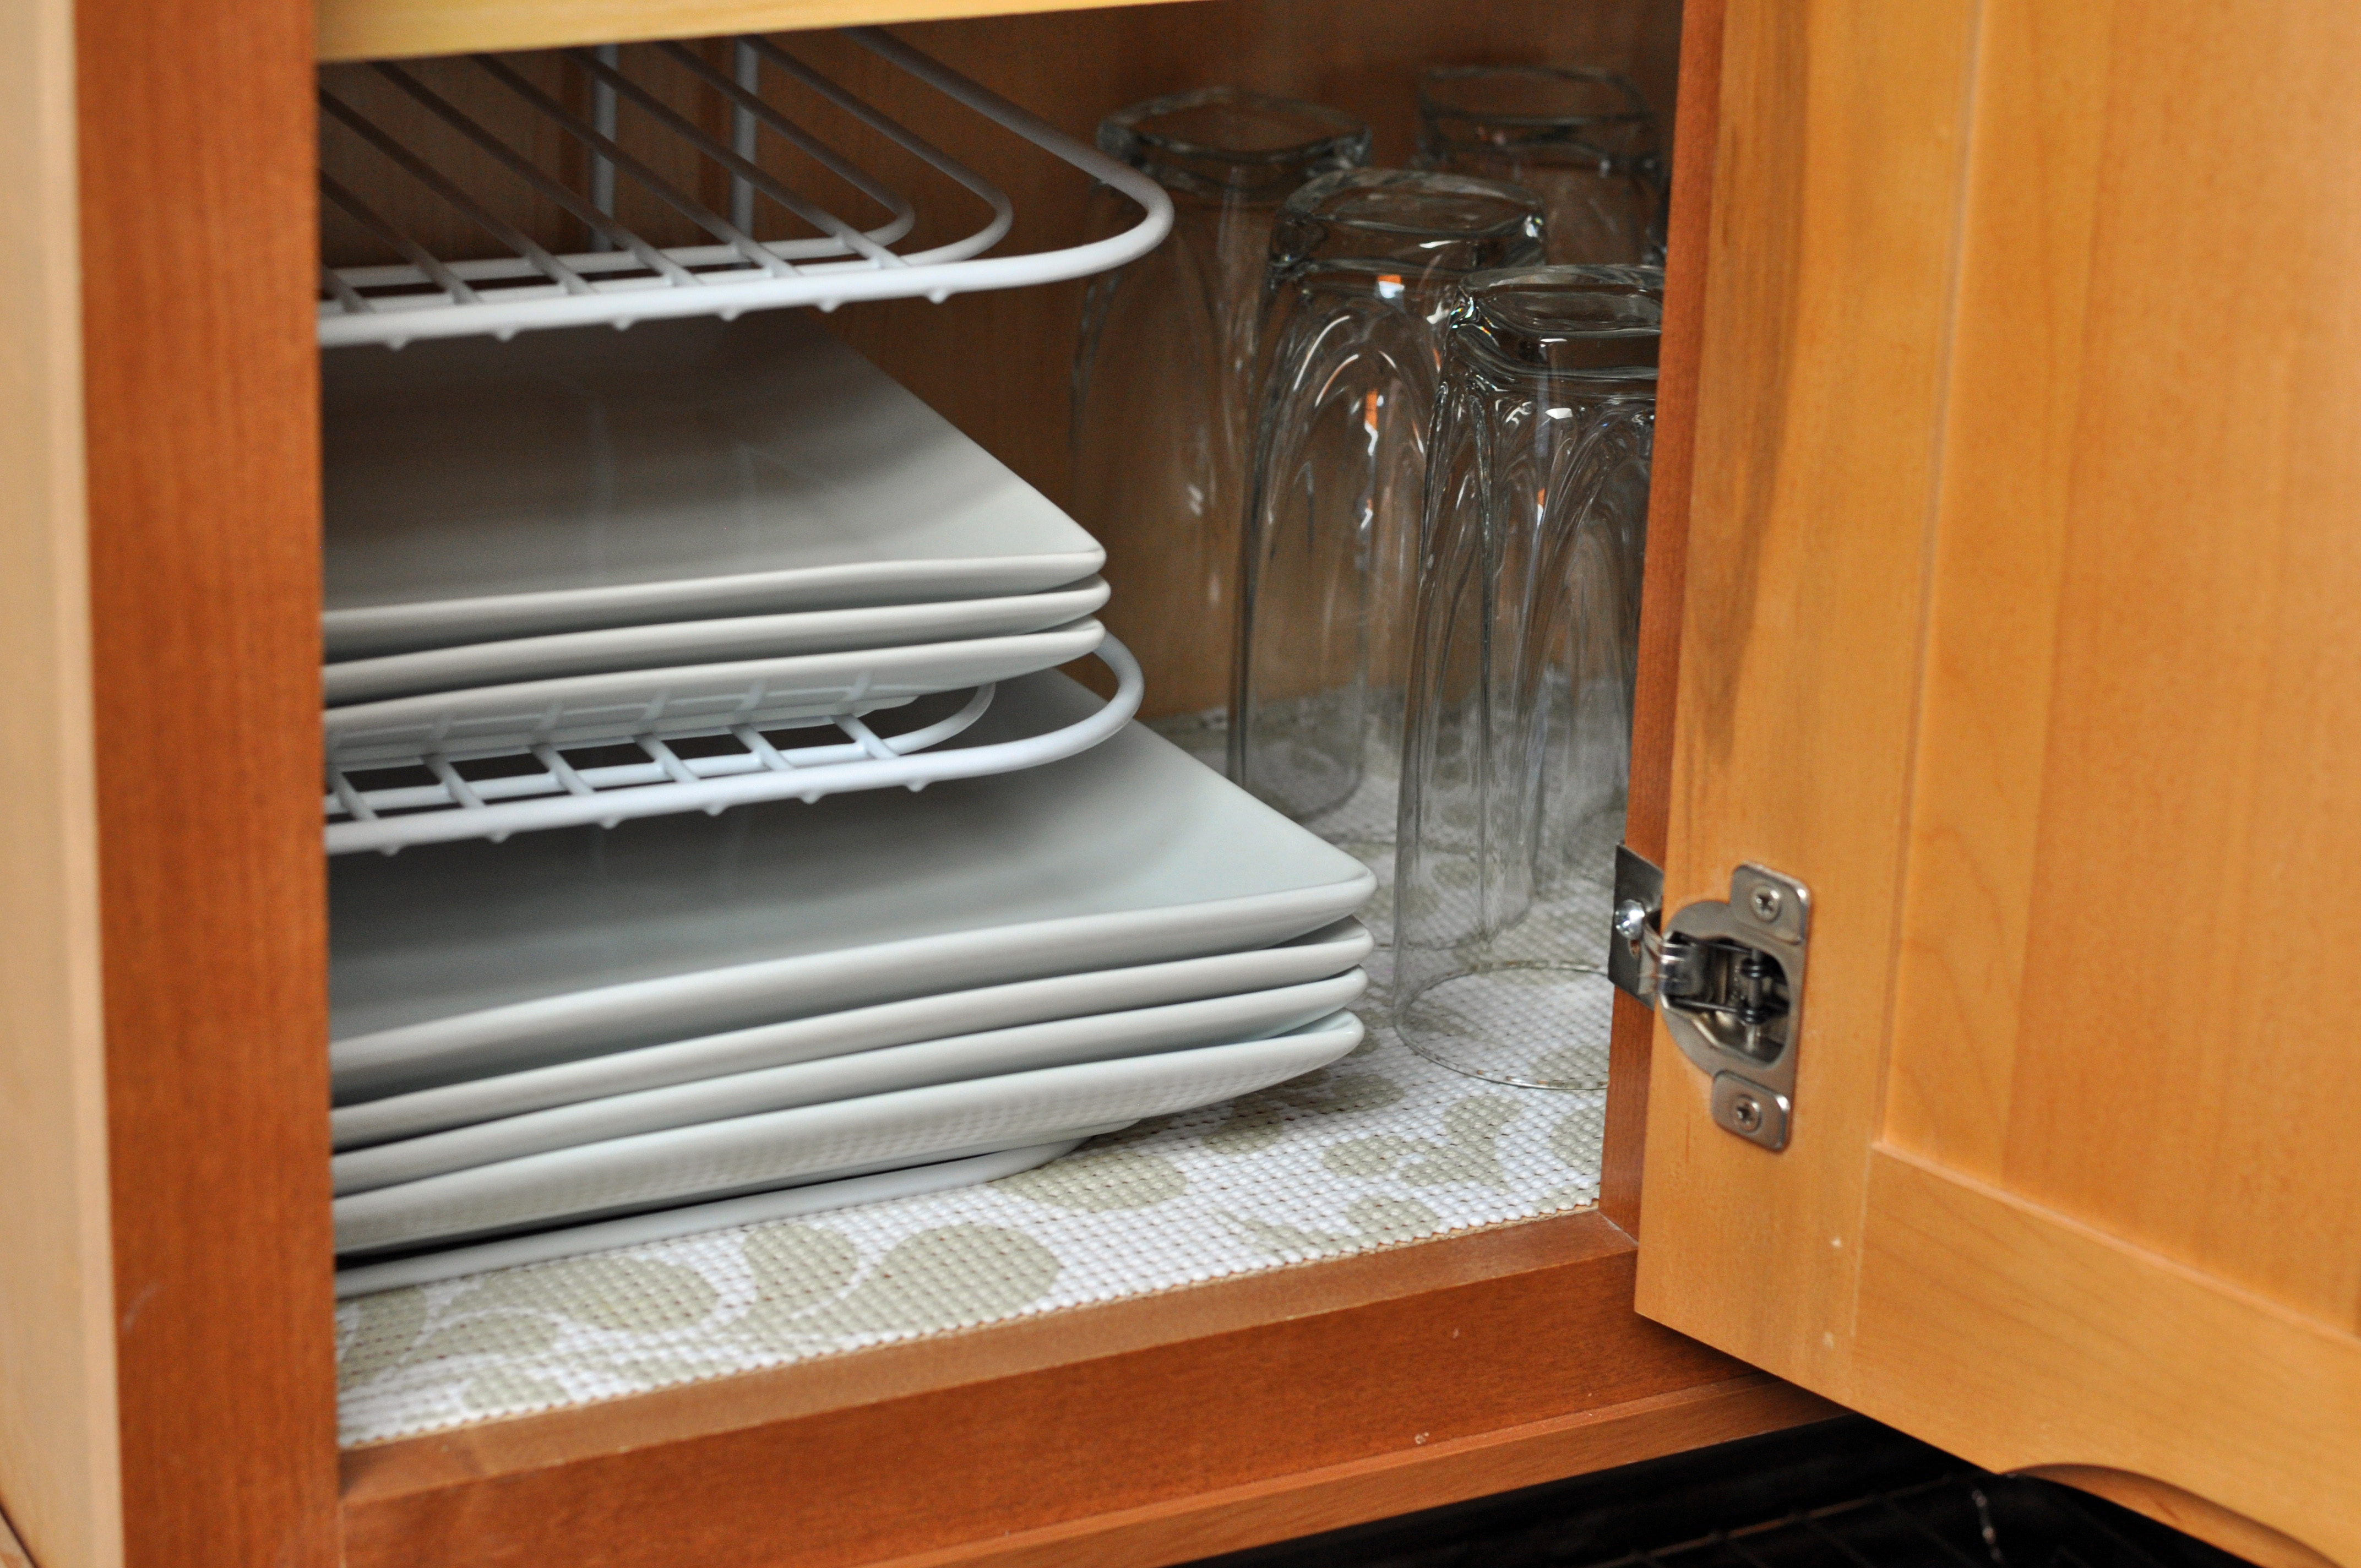 Cabinets With Duck Brand S Shelf Liner, What Is The Best Shelf Liner For Kitchen Cabinets